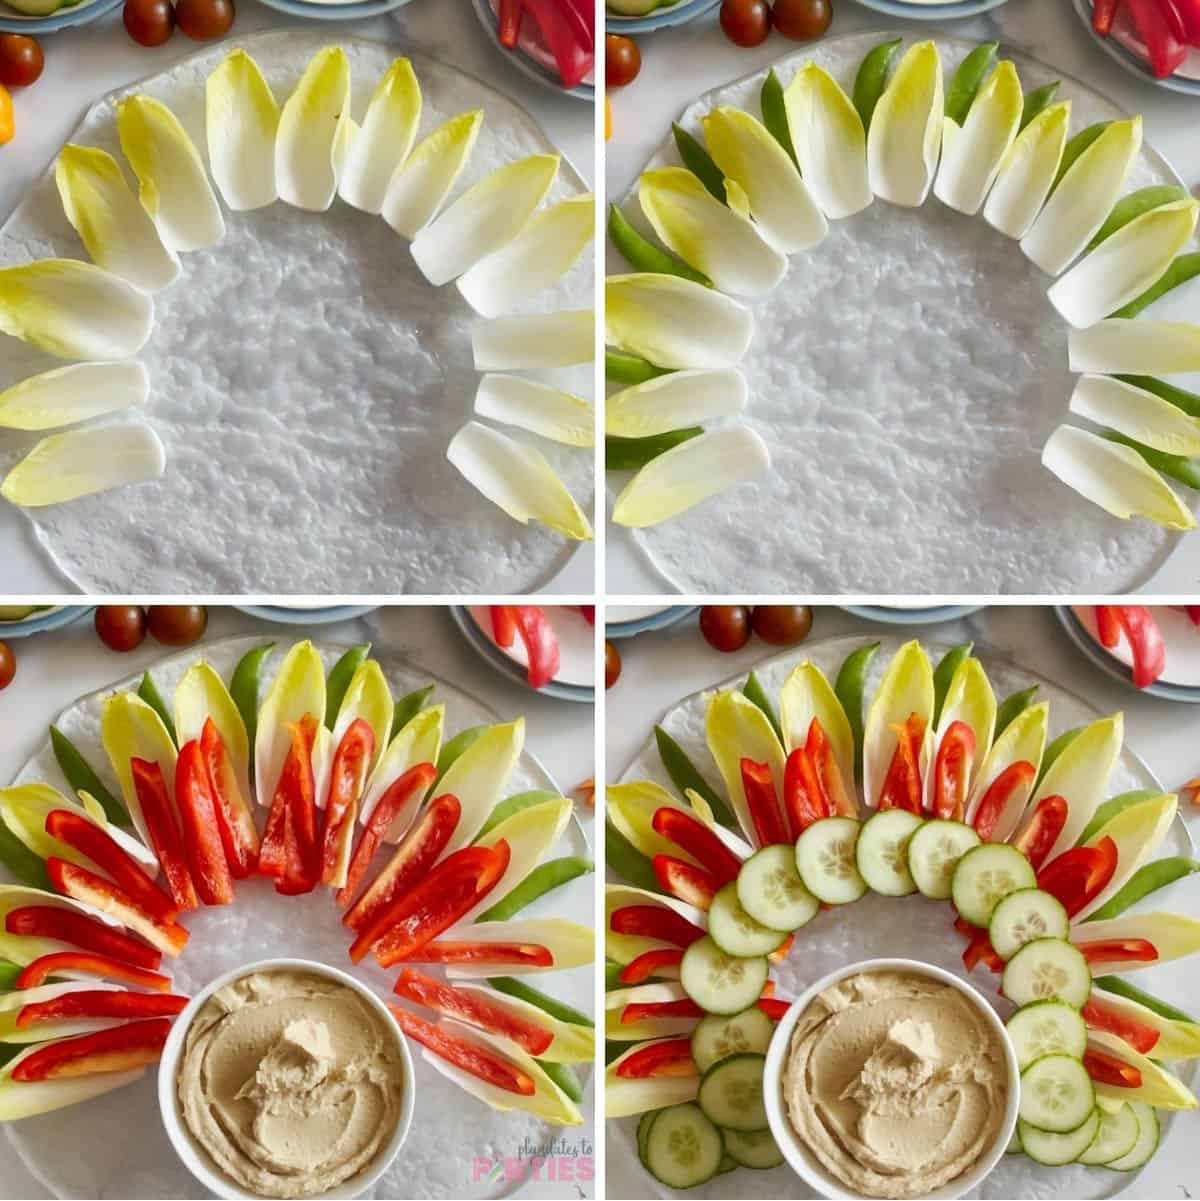 Arranging endive, snap peas, bell pepper, and cucumber into a turkey.